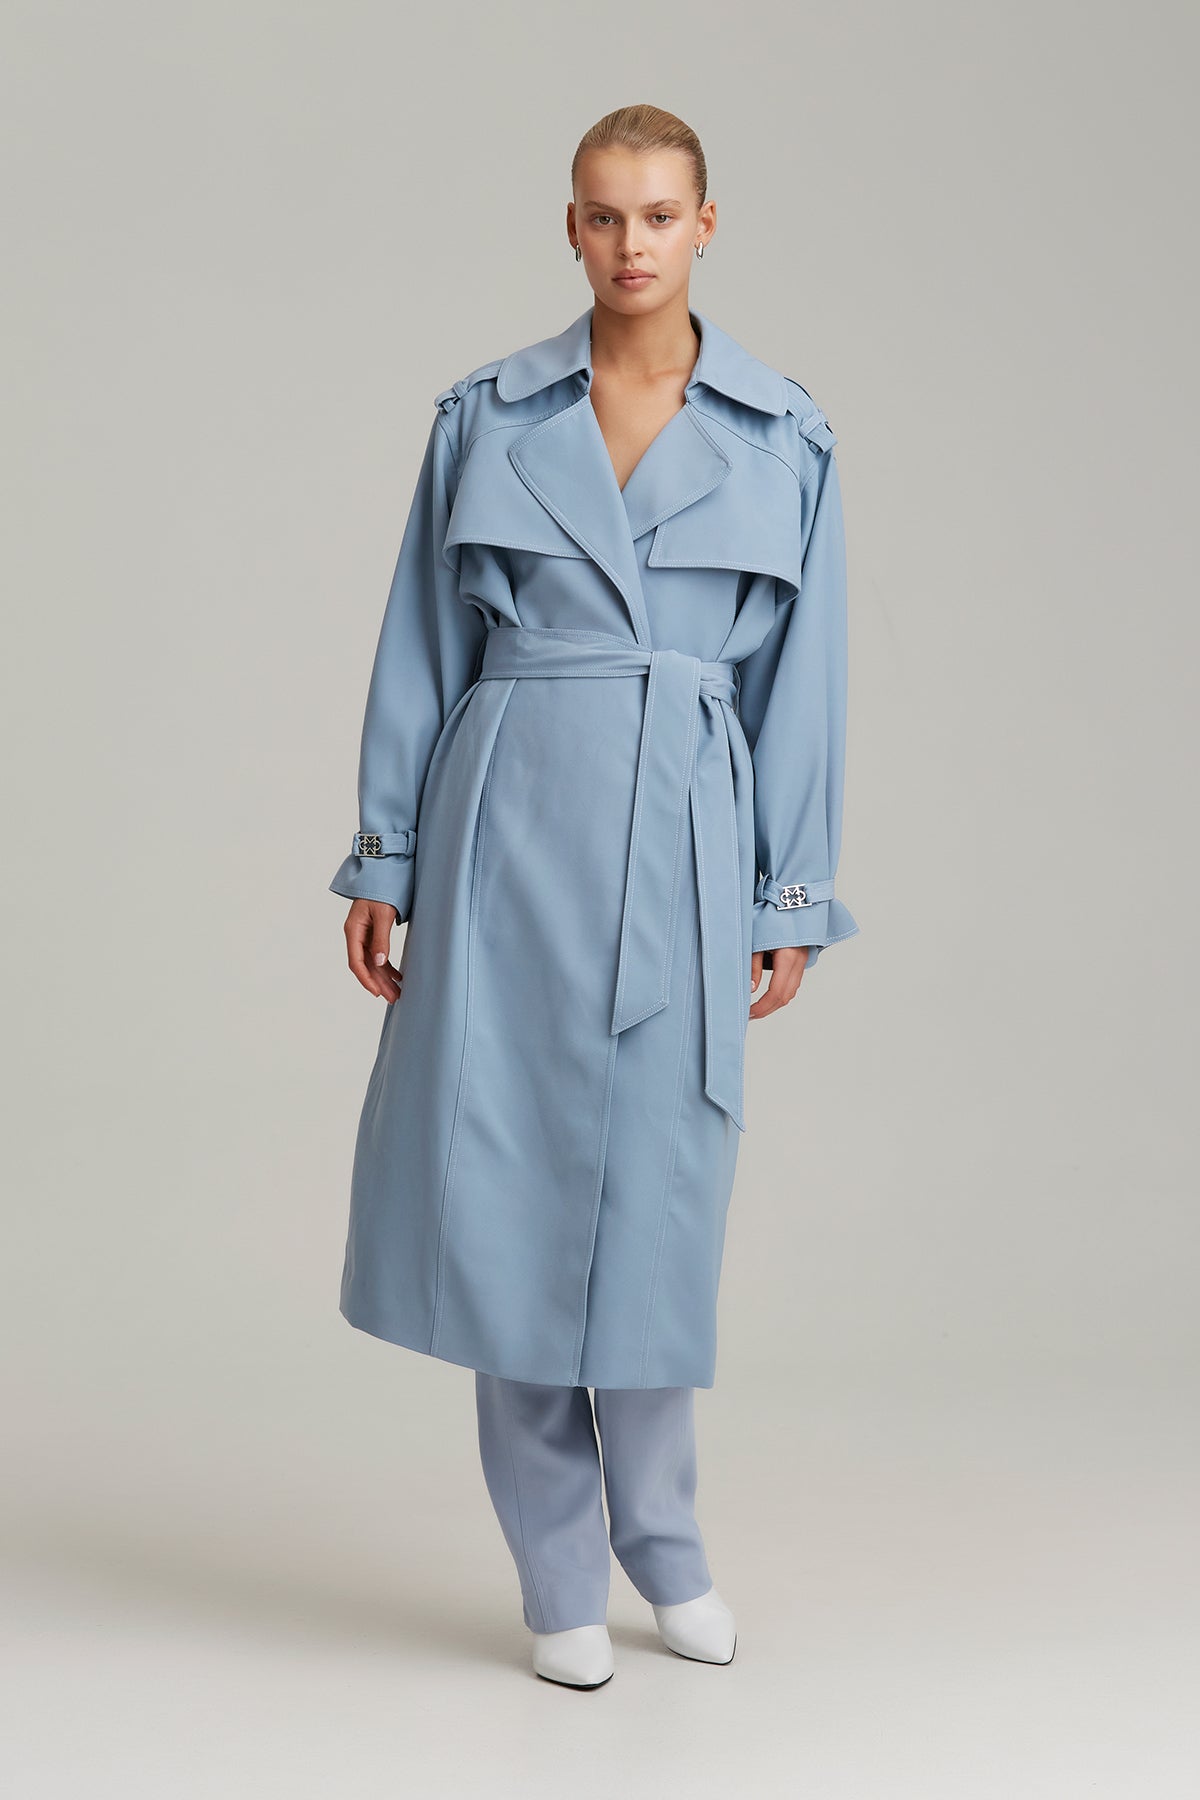 C/MEO Collective - Definition Trench - Duck Egg